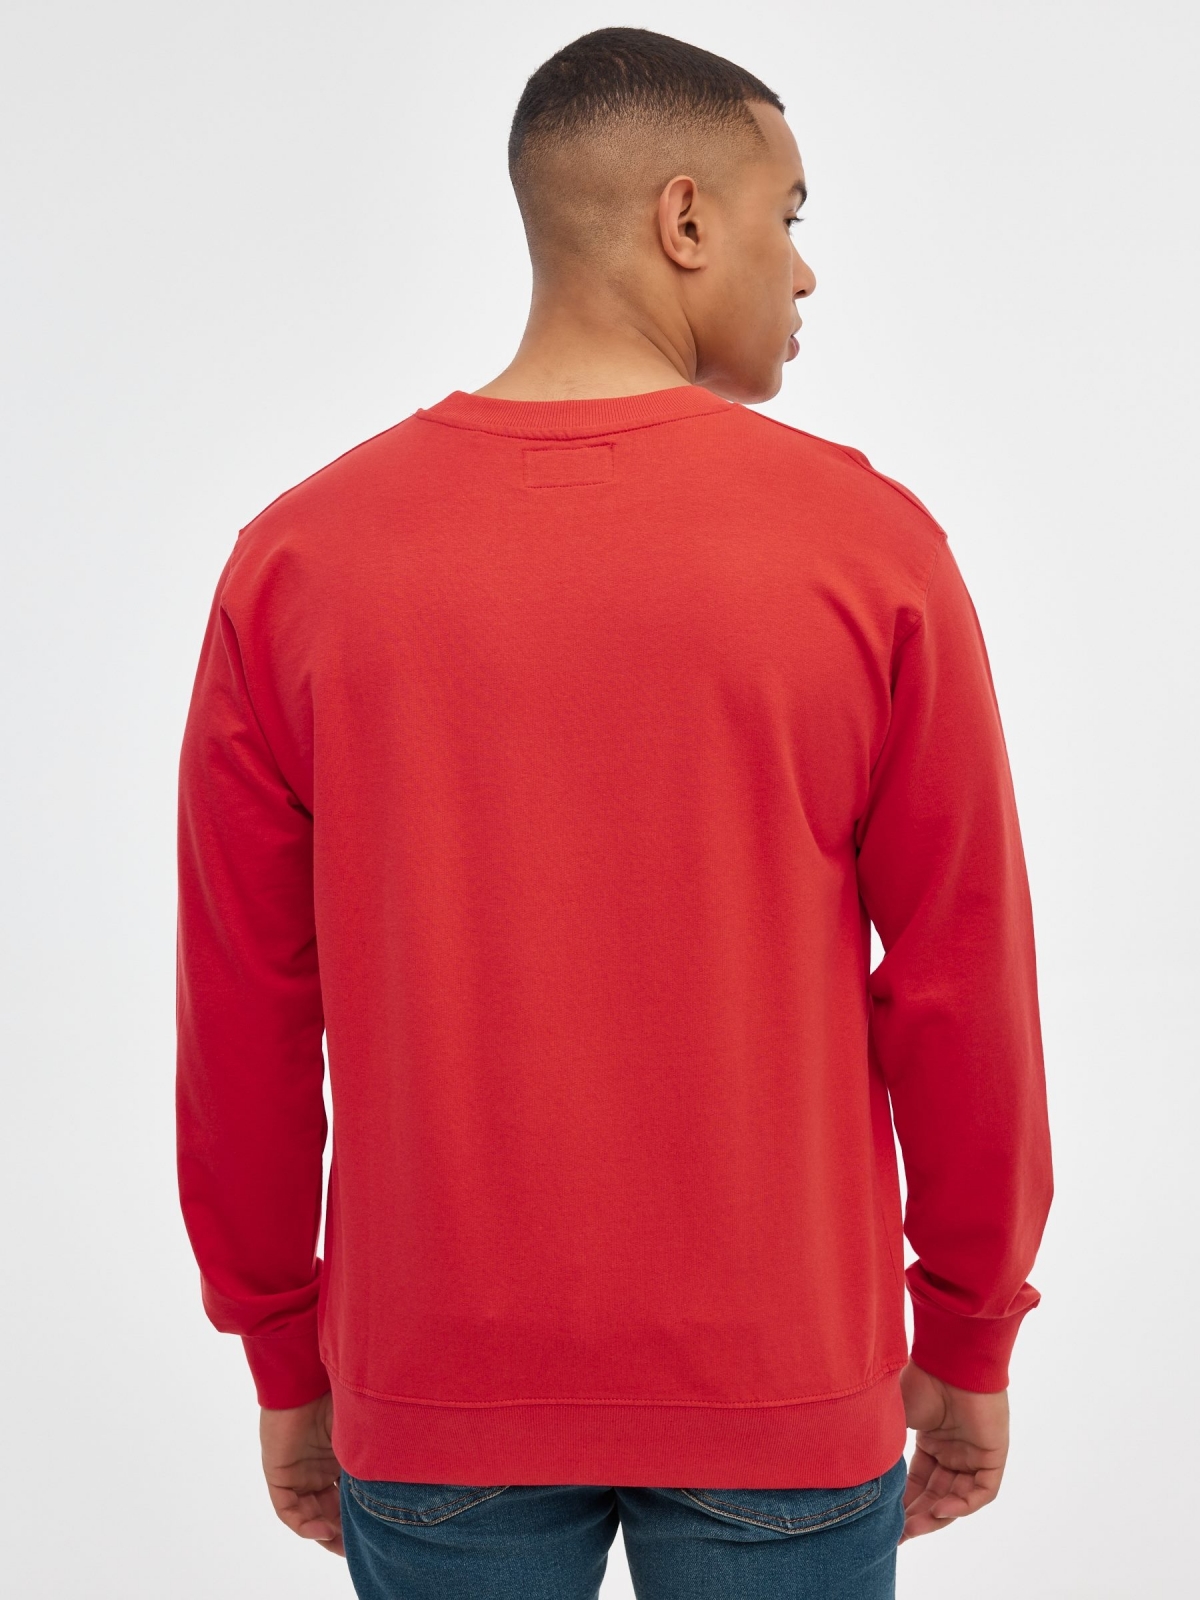 INSIDE hoodless sweatshirt red middle back view